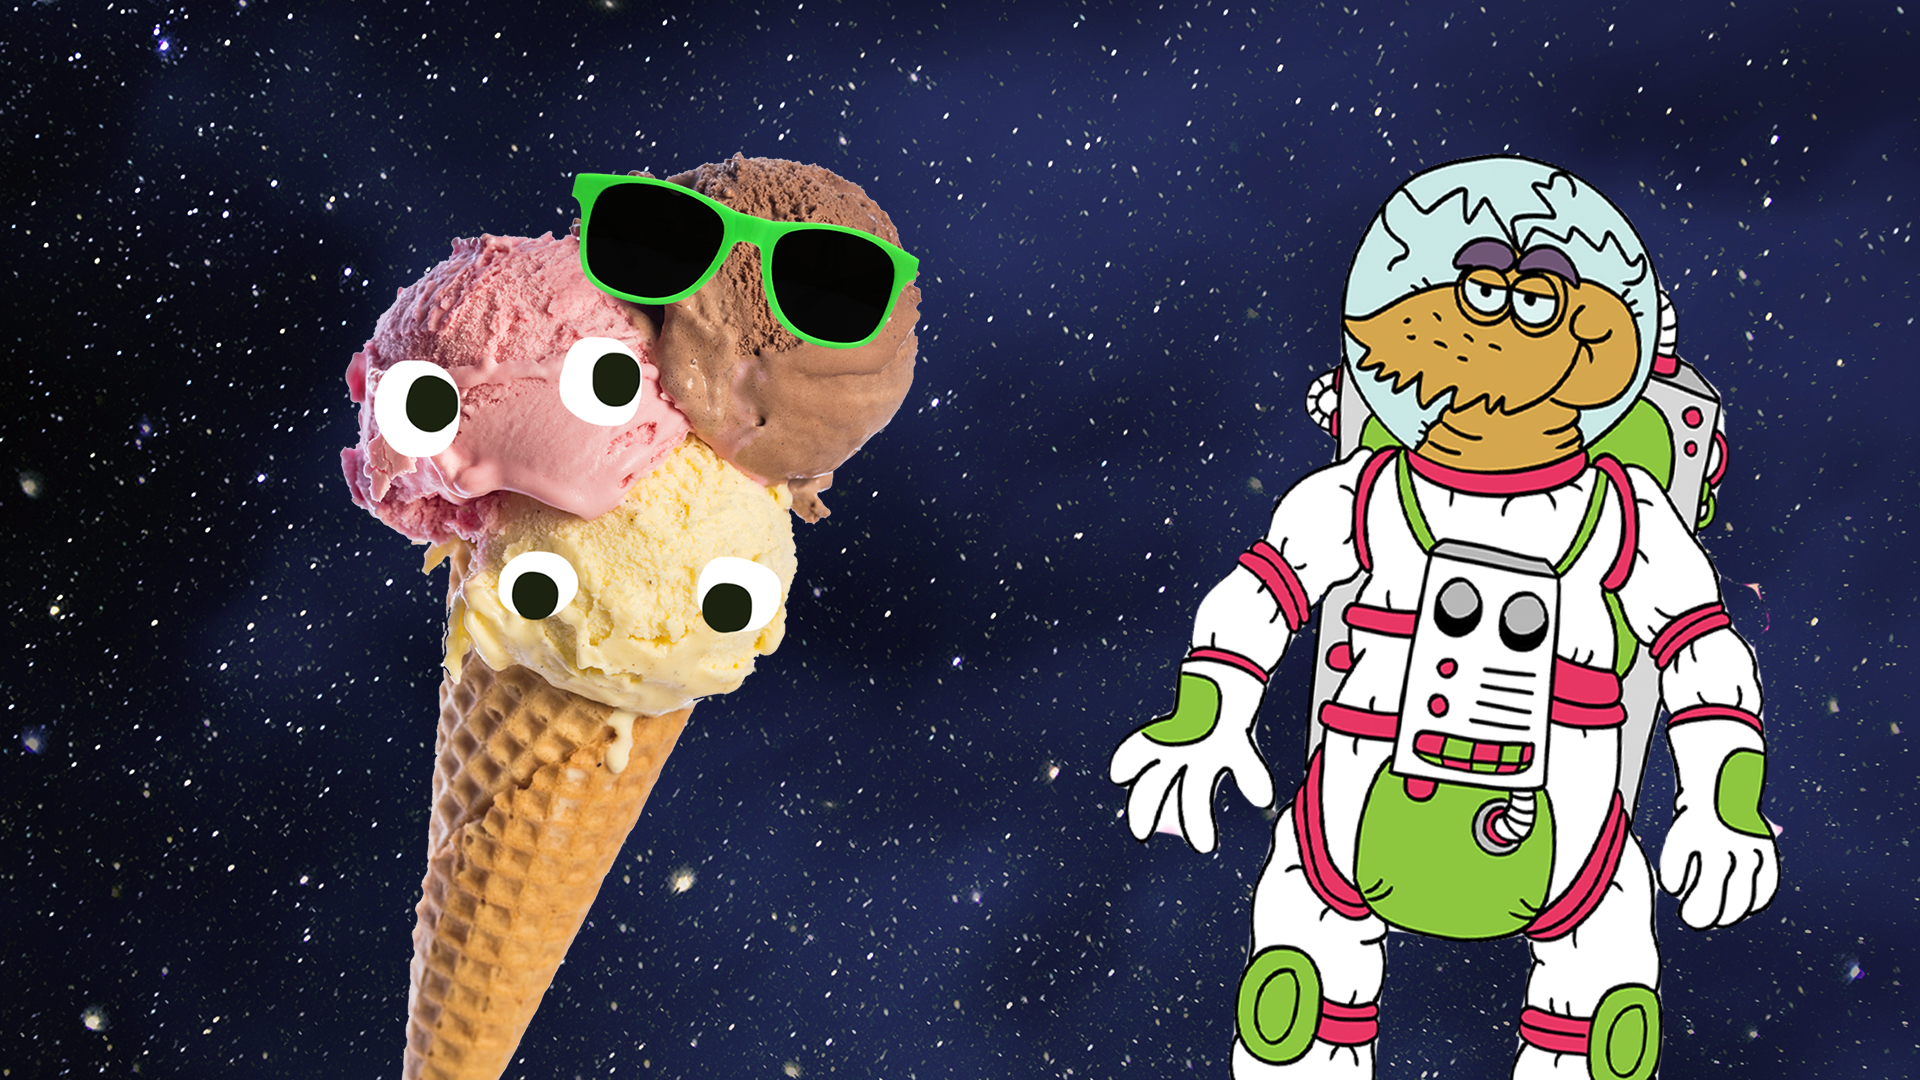 Flea and ice cream in space